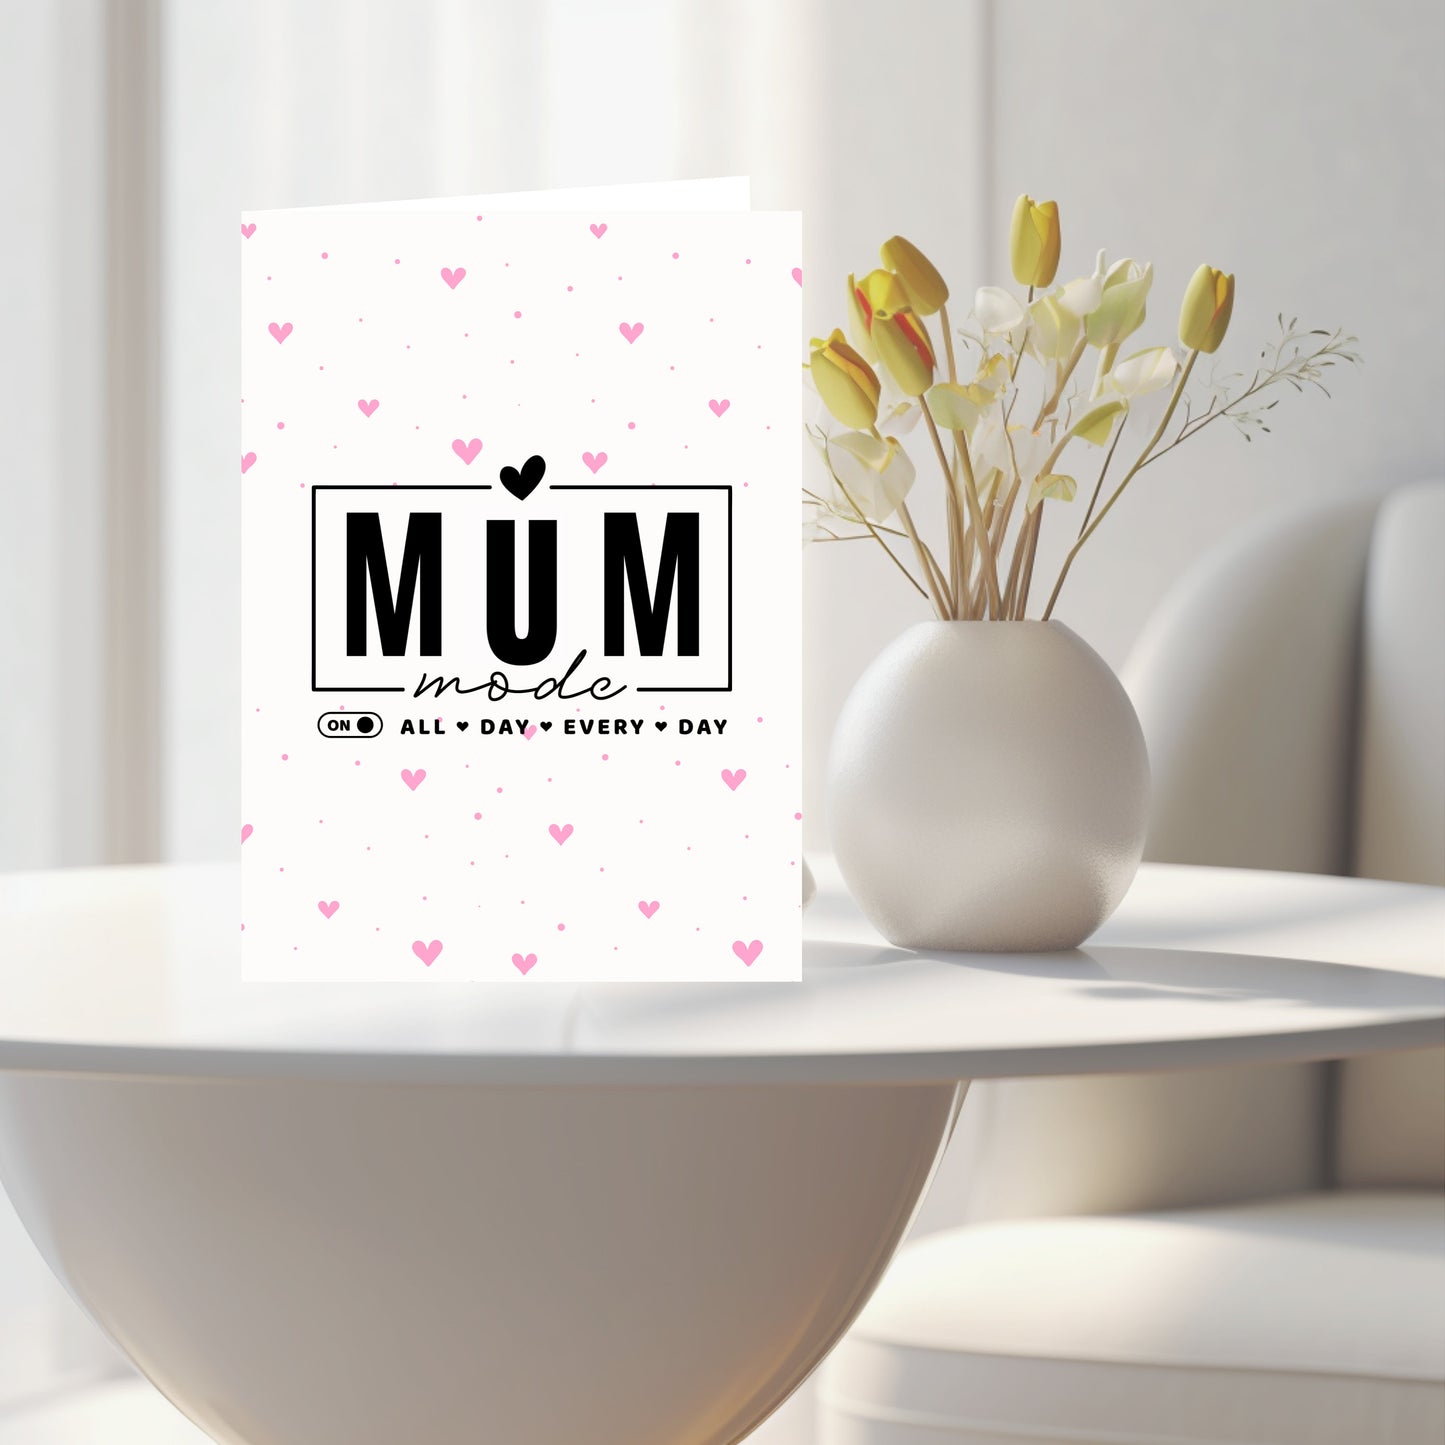 Mum Mode Personalized mothers day card, Mother’s Day, beautiful card, Custom Mother’s Day card for mothers day gift for mum.